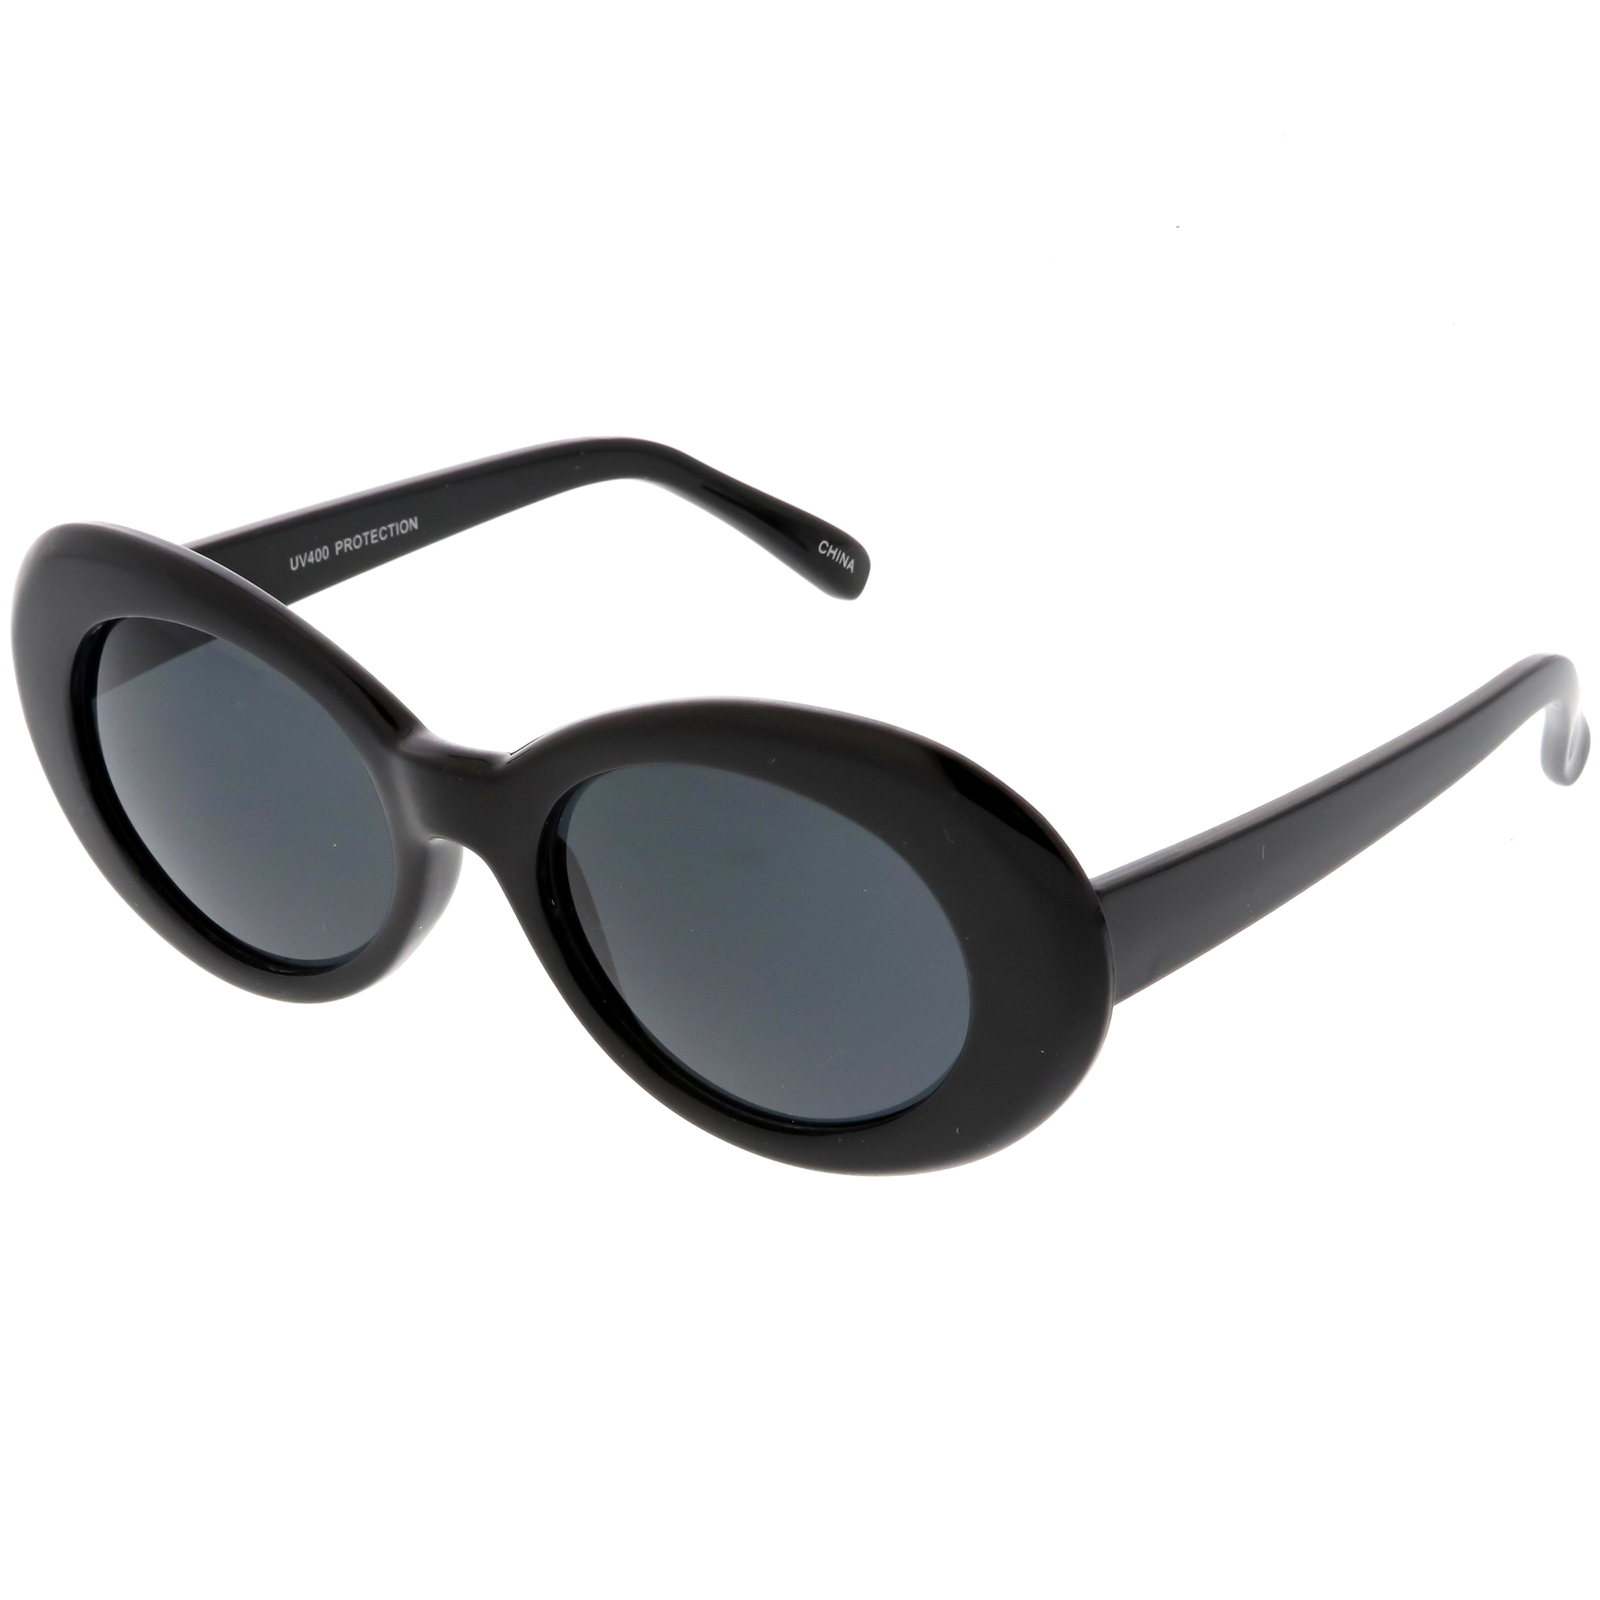 Large Retro Mod Oval Sunglasses Thick Frame Wide Arms Neutral Colored Lens  53mm (Black / Smoke)